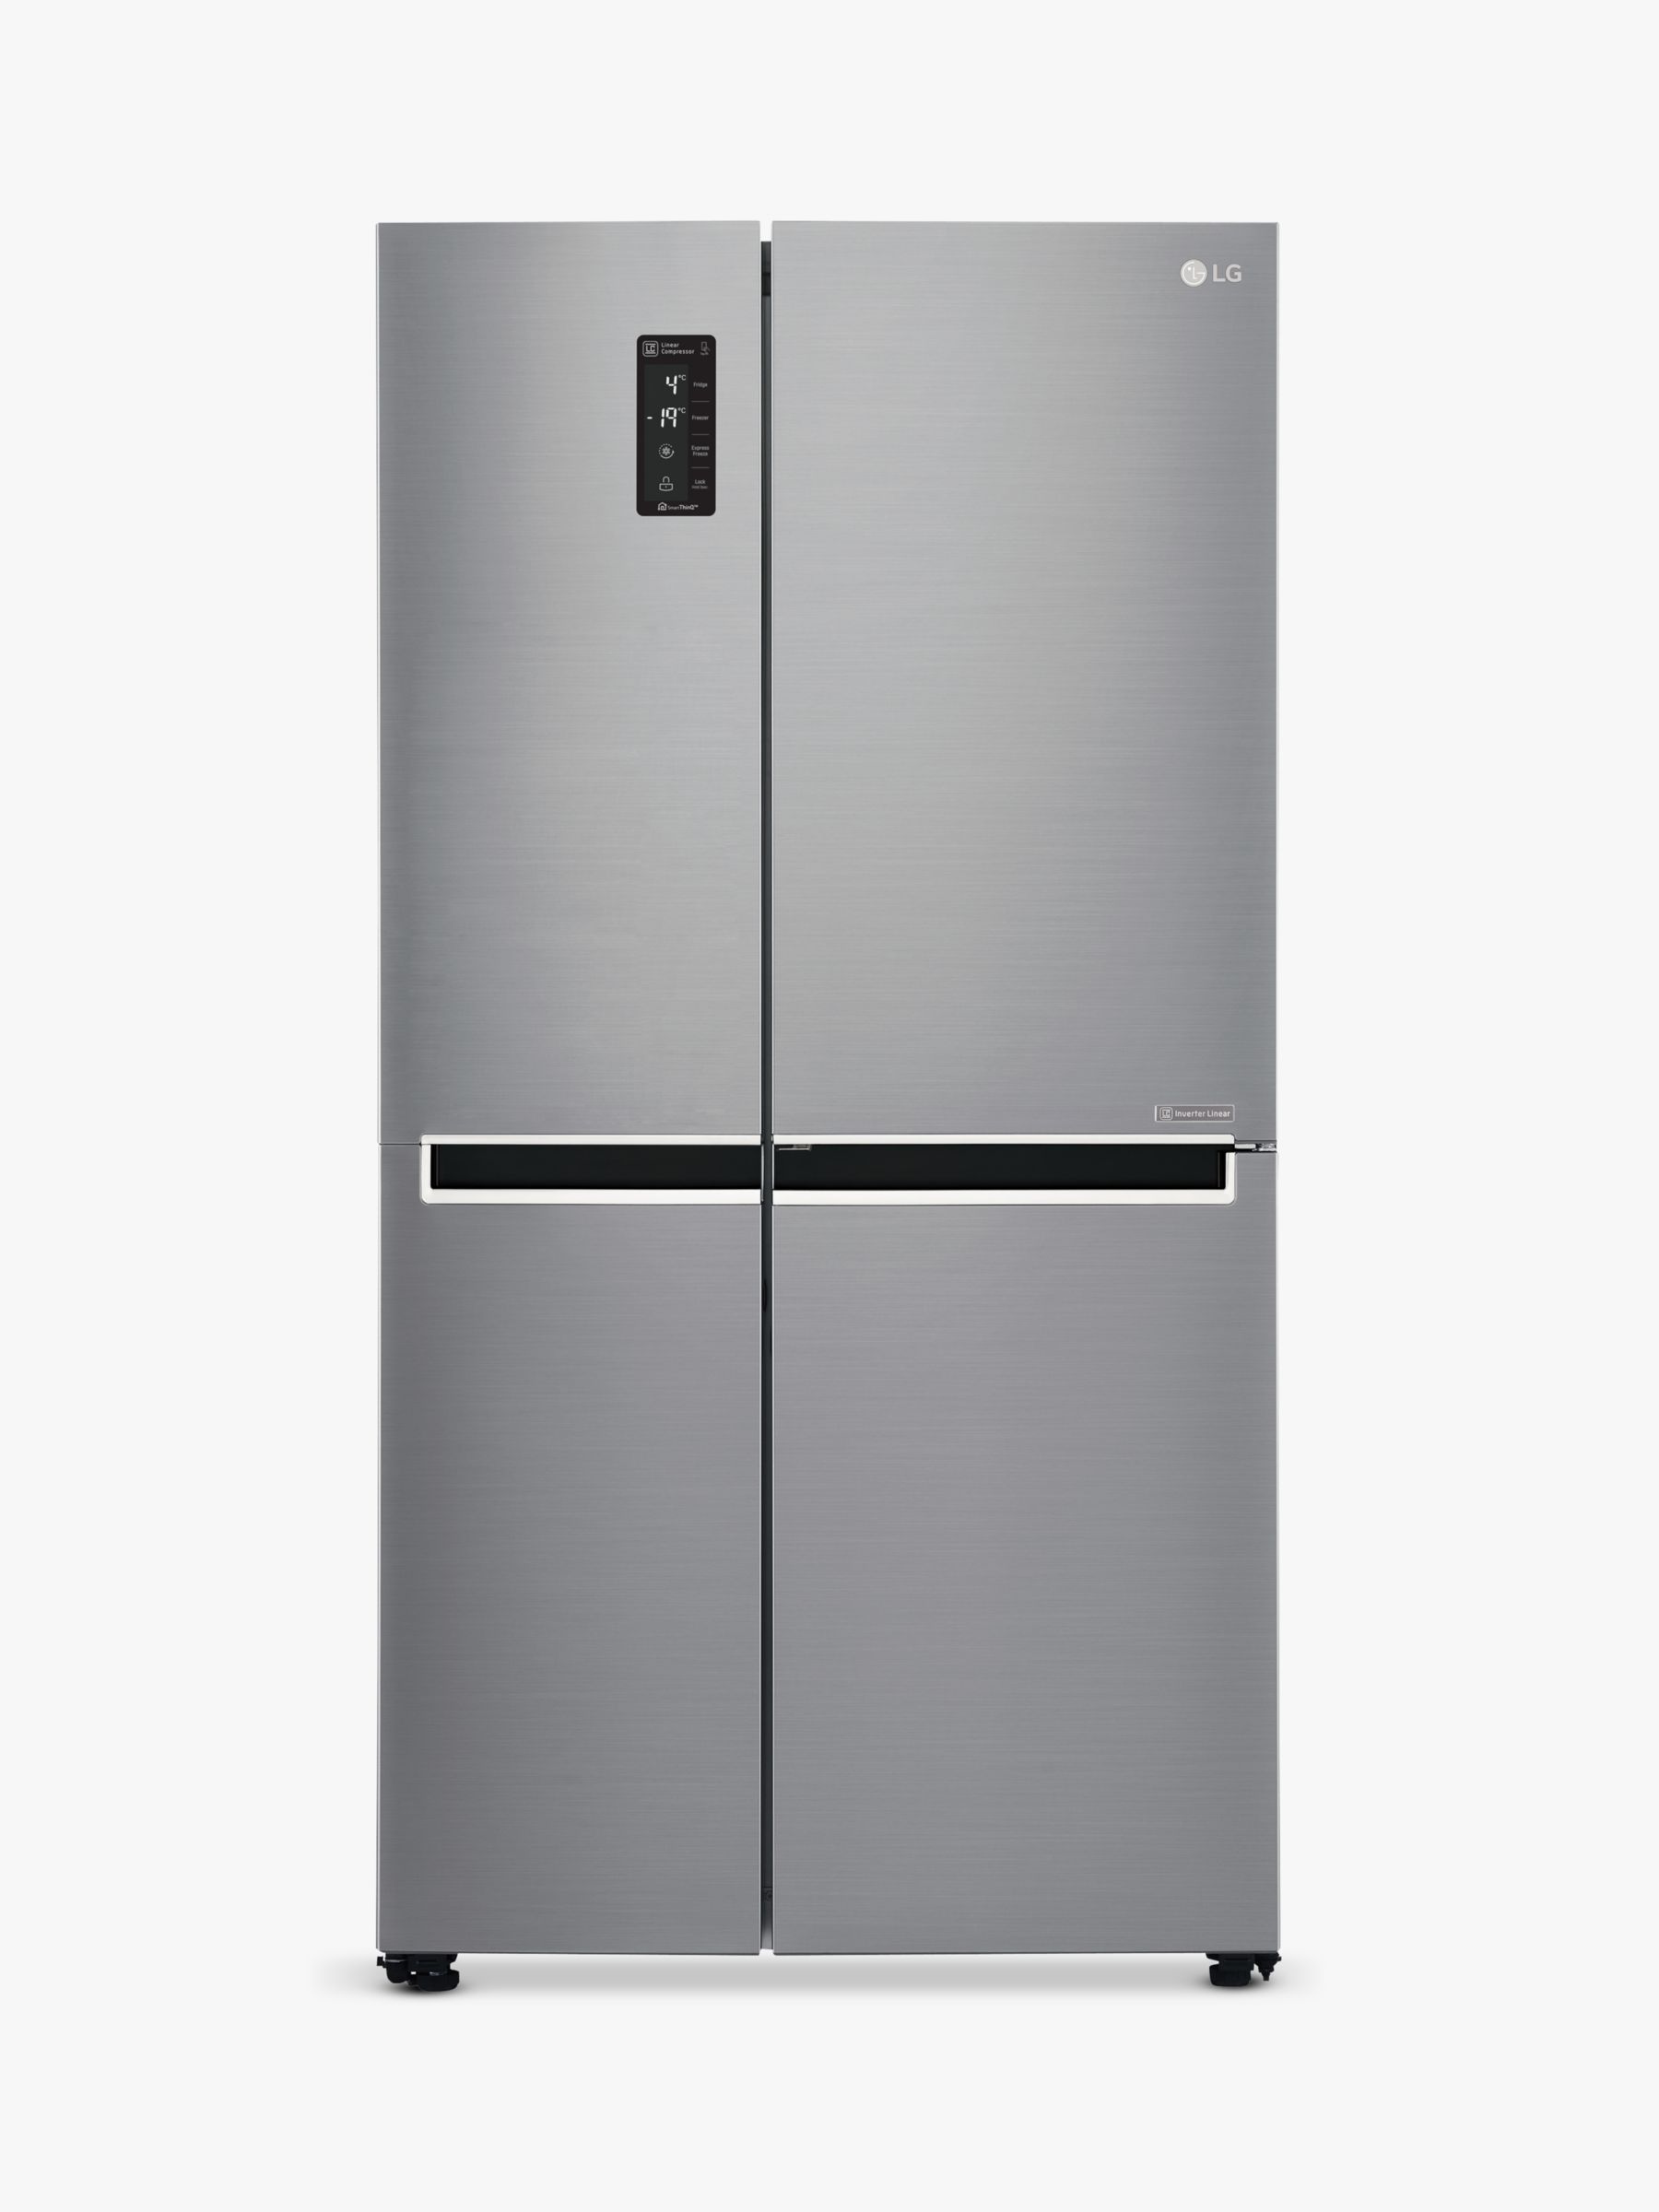 LG GSB760PZXV American Style Fridge Freezer, A+ Energy Rating, 90cm Wide, Silver